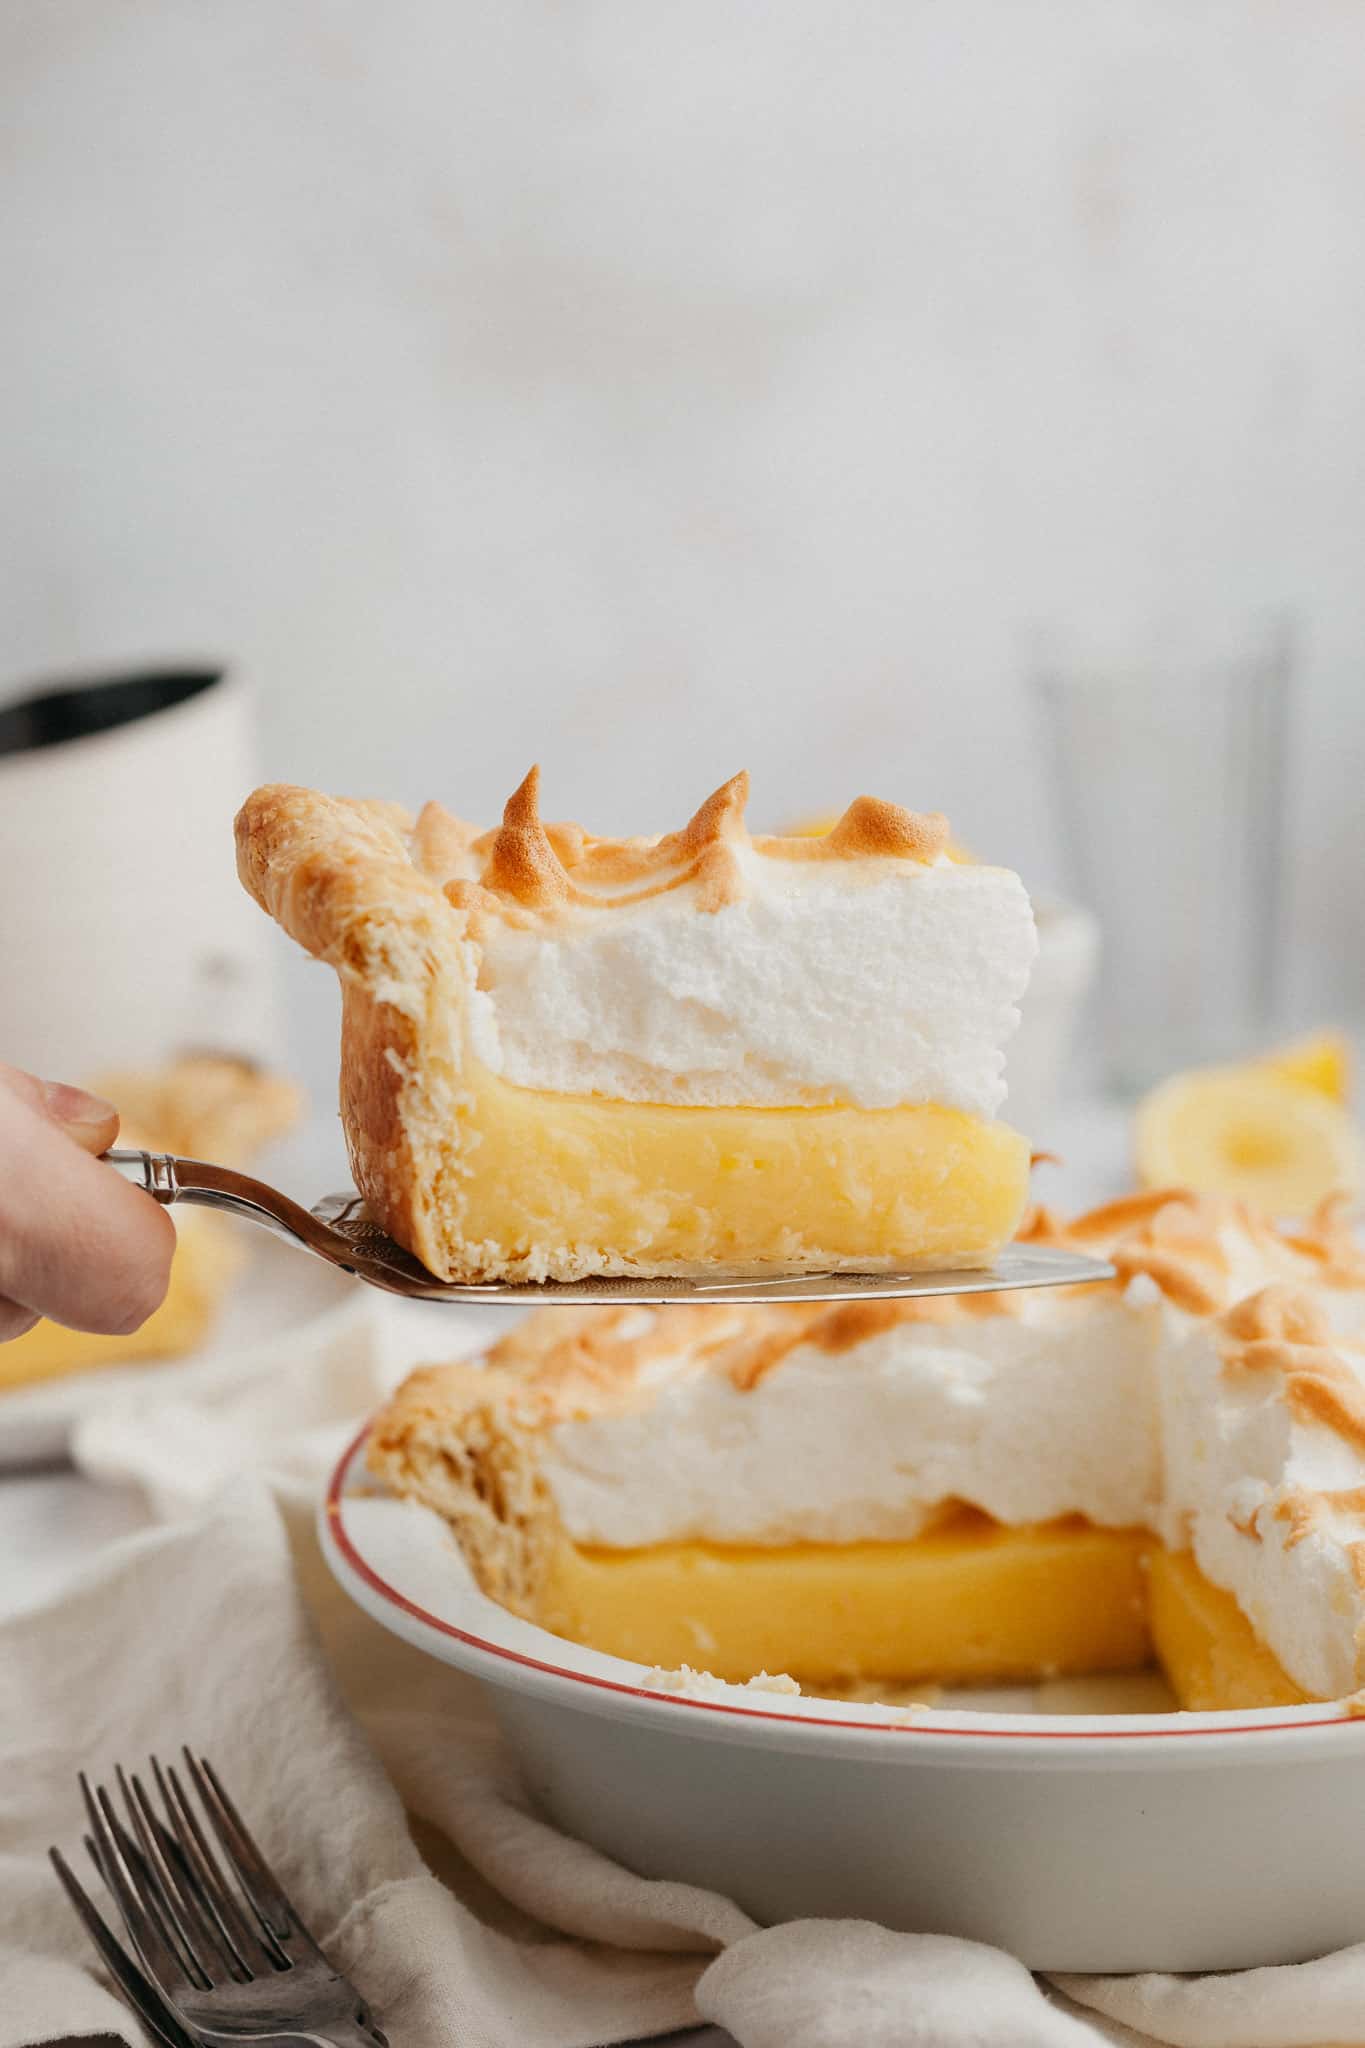 a slice of lemon meringue pie being lifted out with a serving knife.